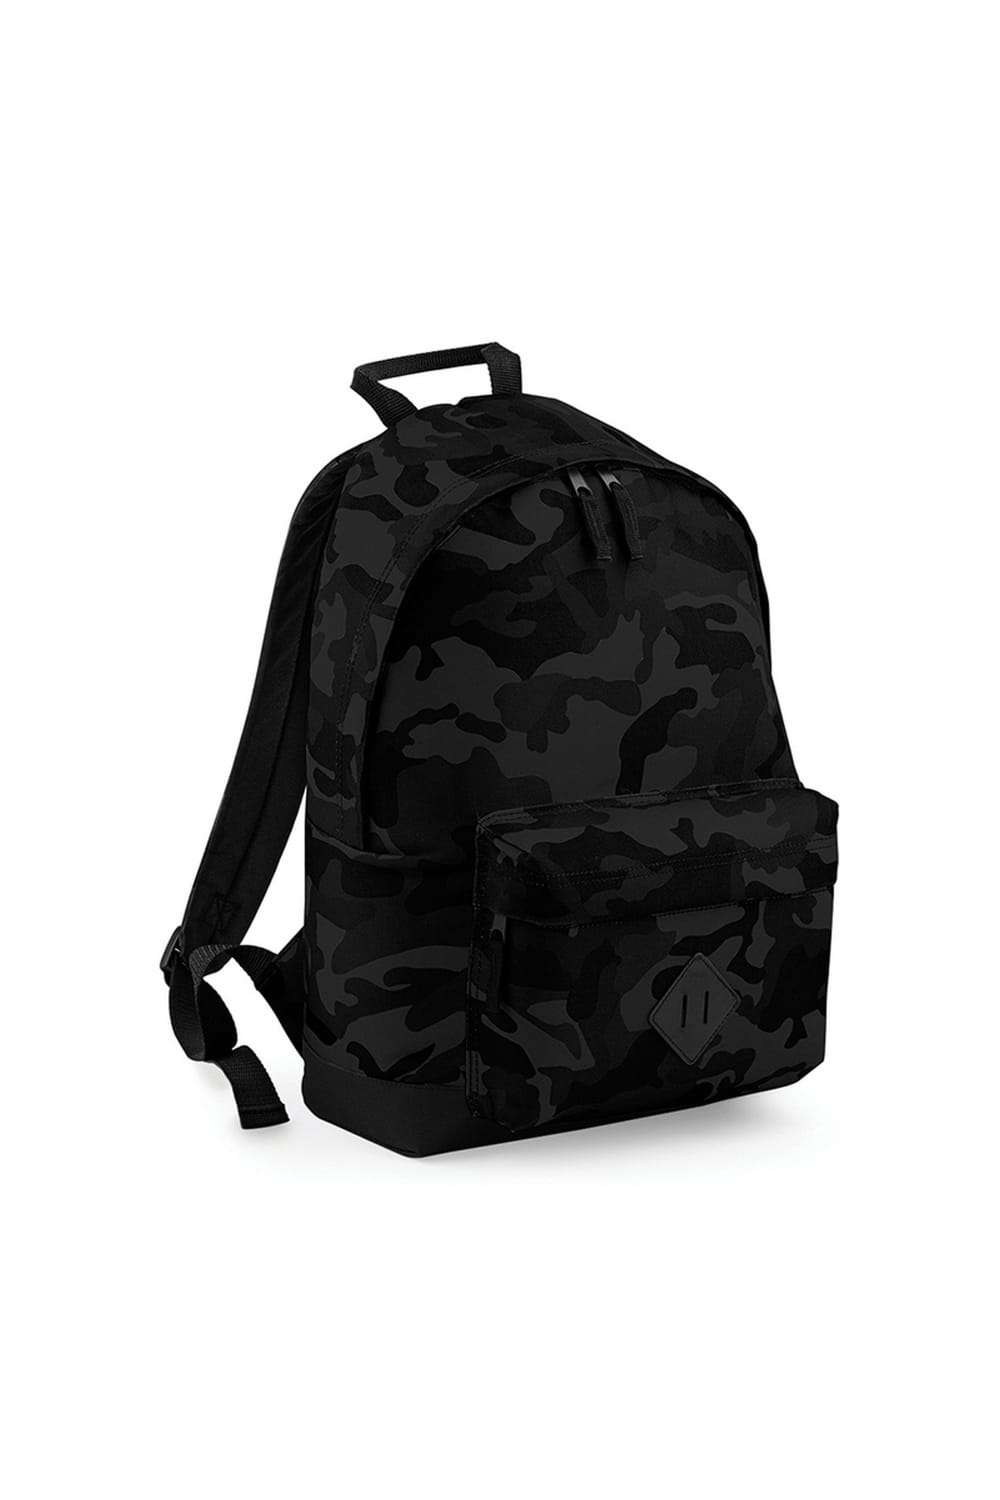 Bagbase Camouflage Backpack / Rucksack (18 Liters) (Pack of 2) (Midnight Camo) (One Size)